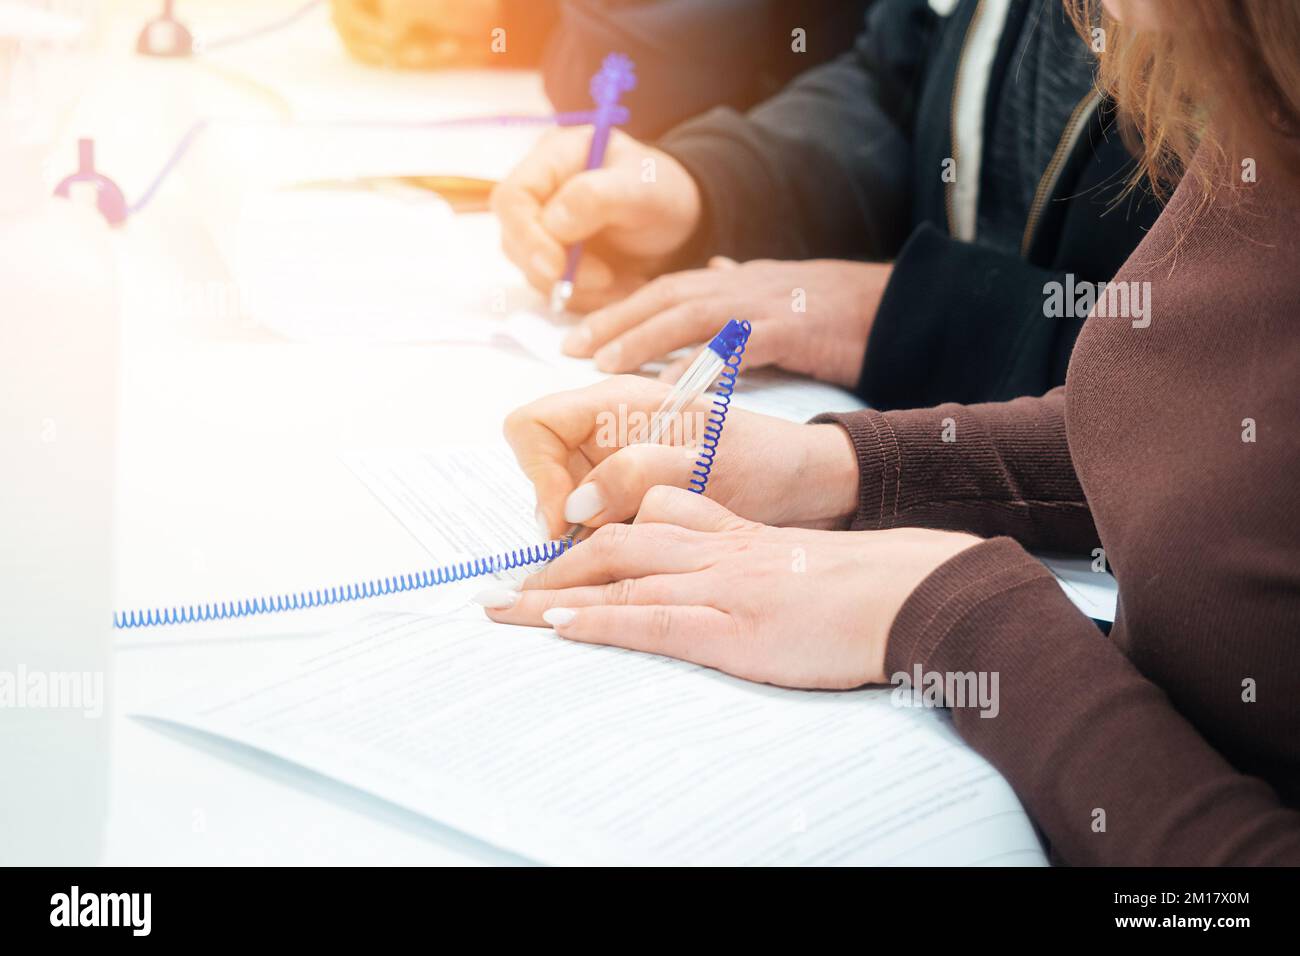 Woman fills out blank application form at table or signs contract. Hands of people with close-up fountain pen. Perspective view Several people simultaneously fill in data with pen on paper.. Stock Photo